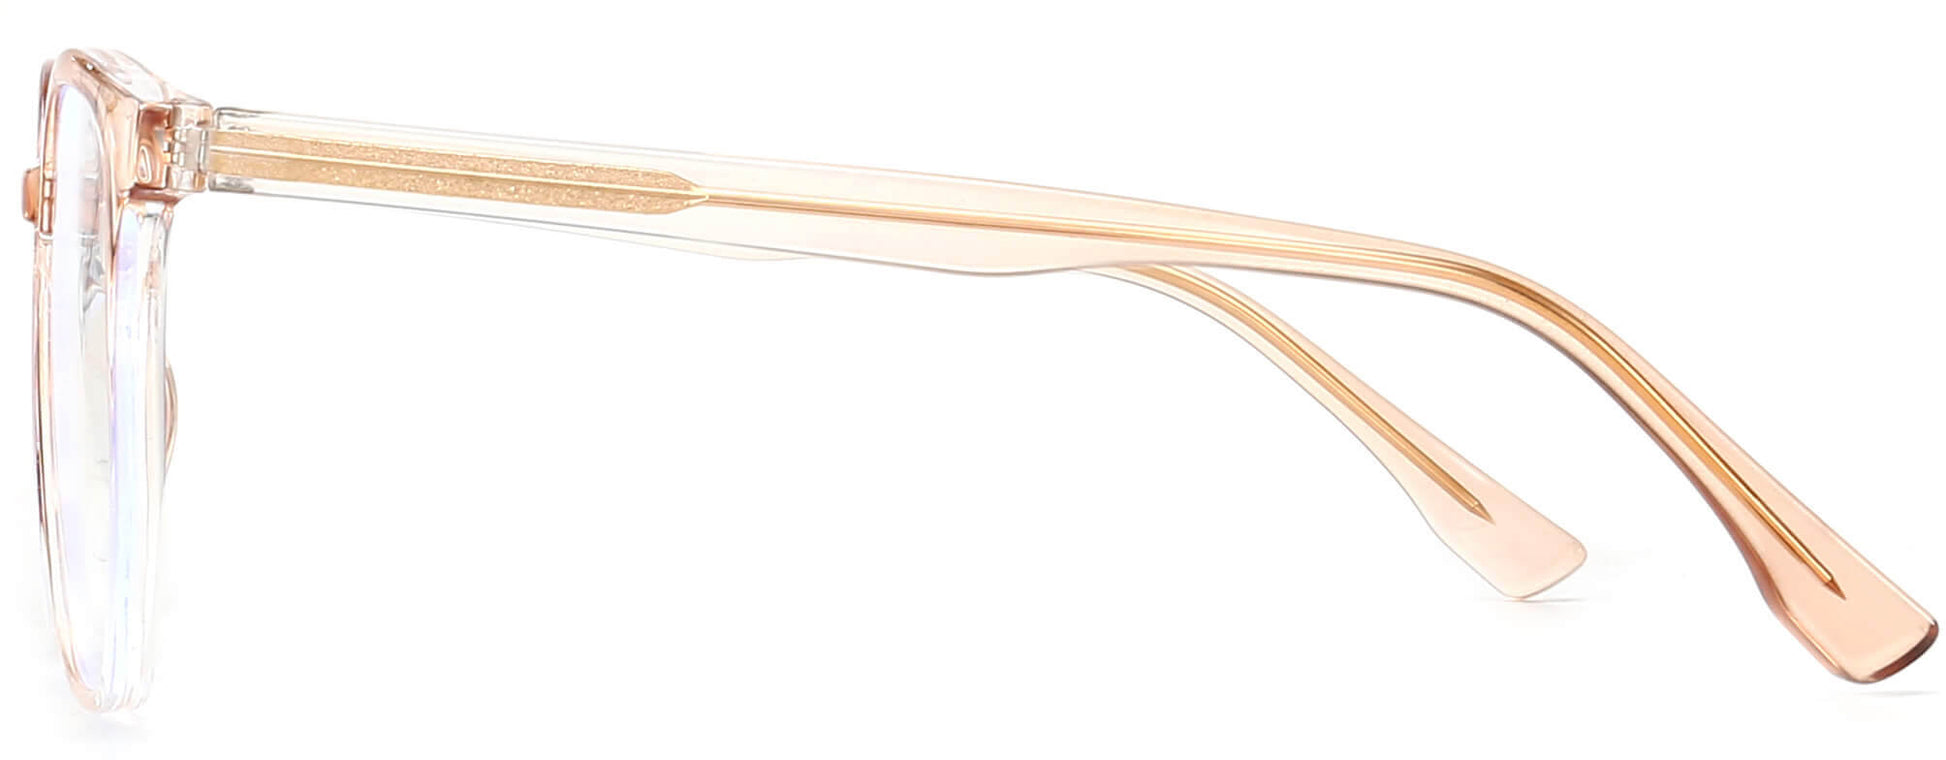 Dusty Rectangle Clear Eyeglasses from ANRRI, side view